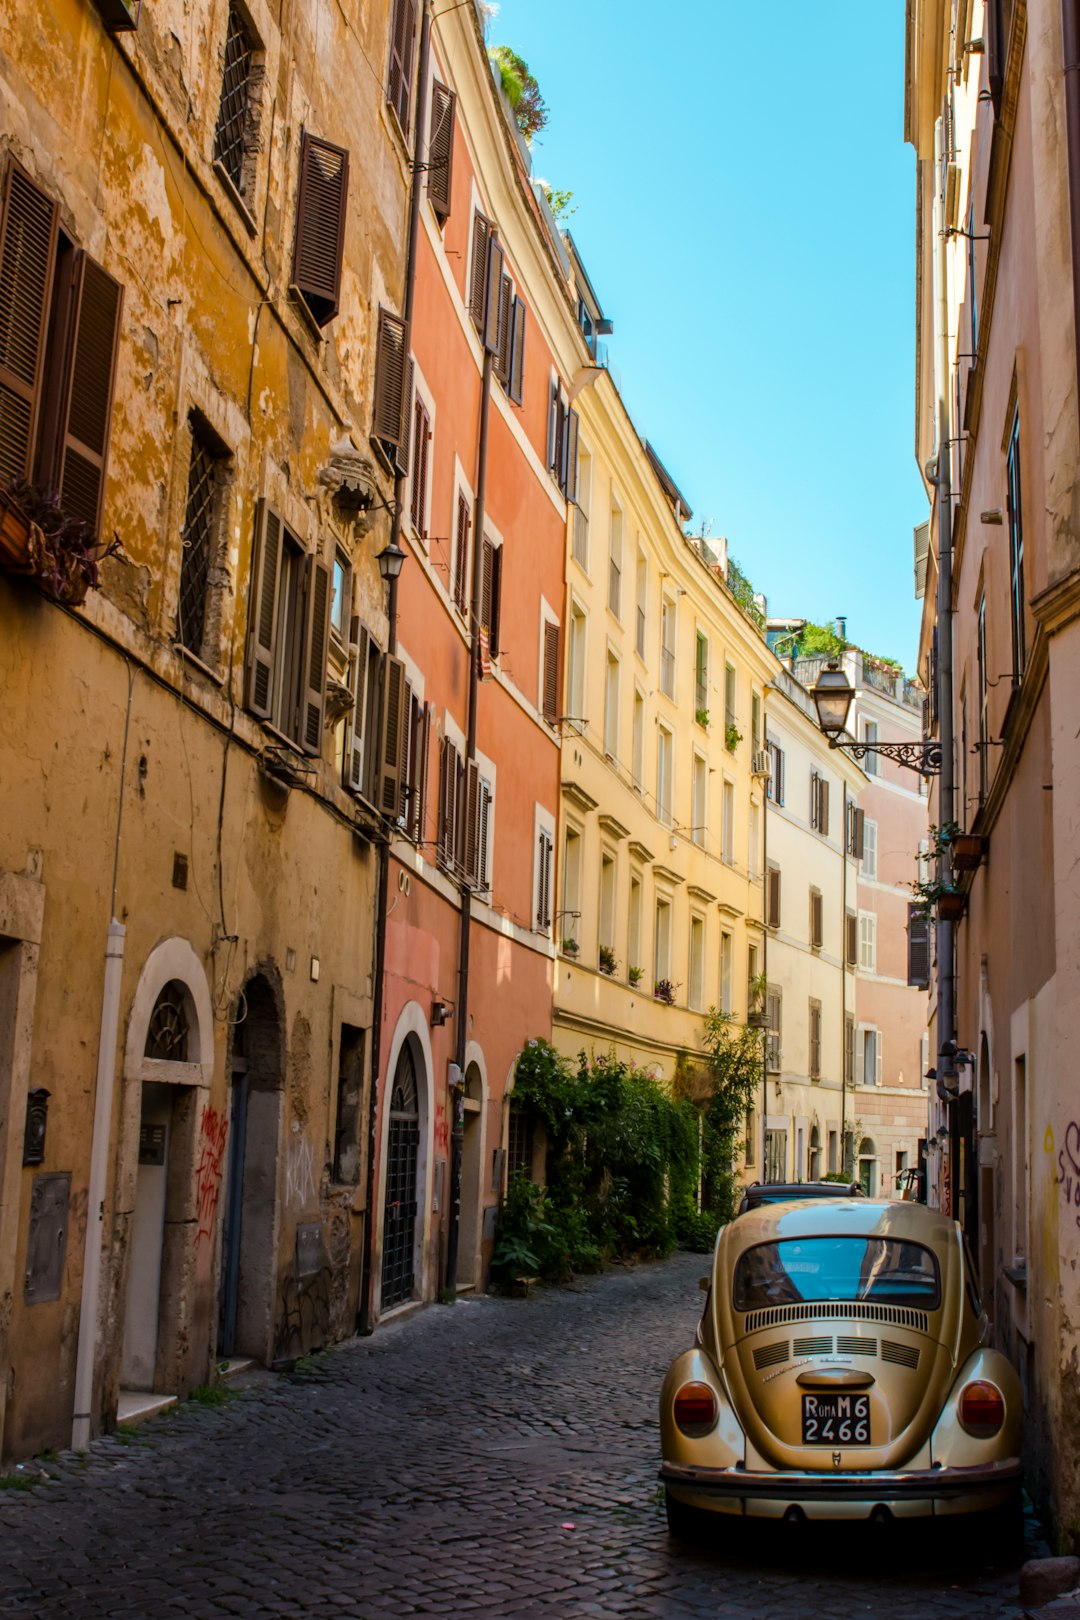 travelers stories about Town in Trastevere, Italy